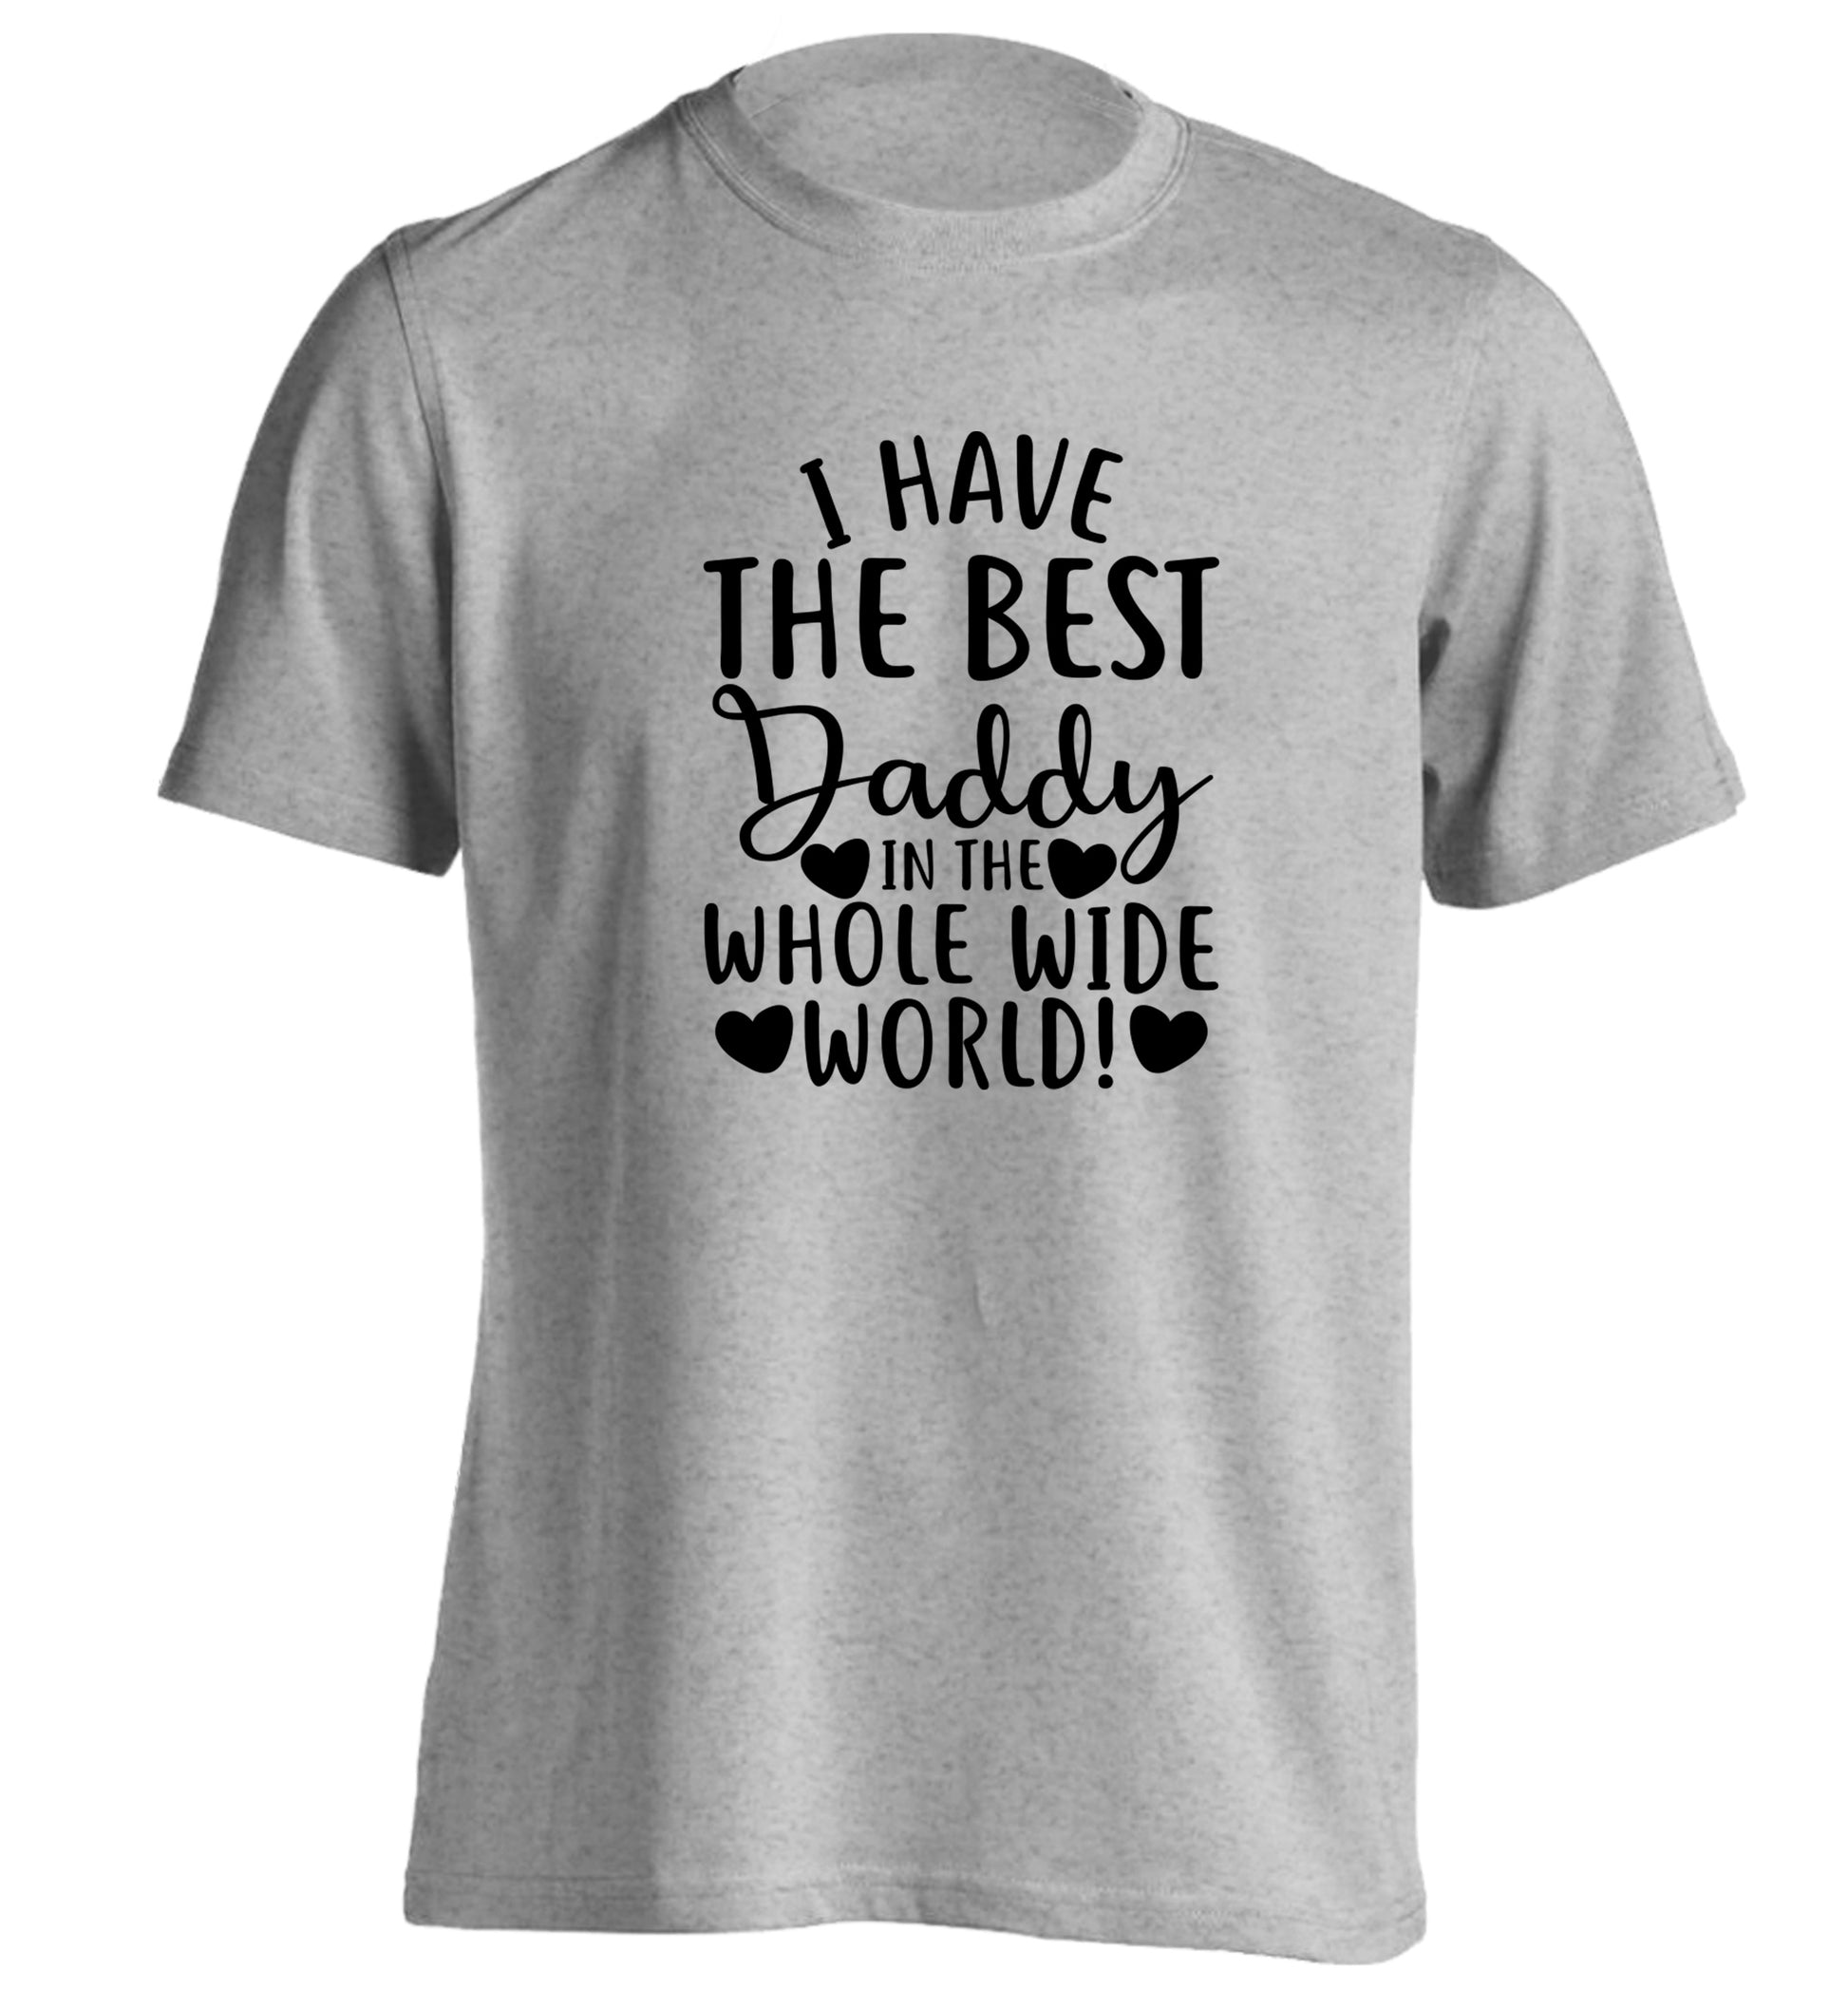 I have the best daddy in the whole wide world adults unisex grey Tshirt 2XL